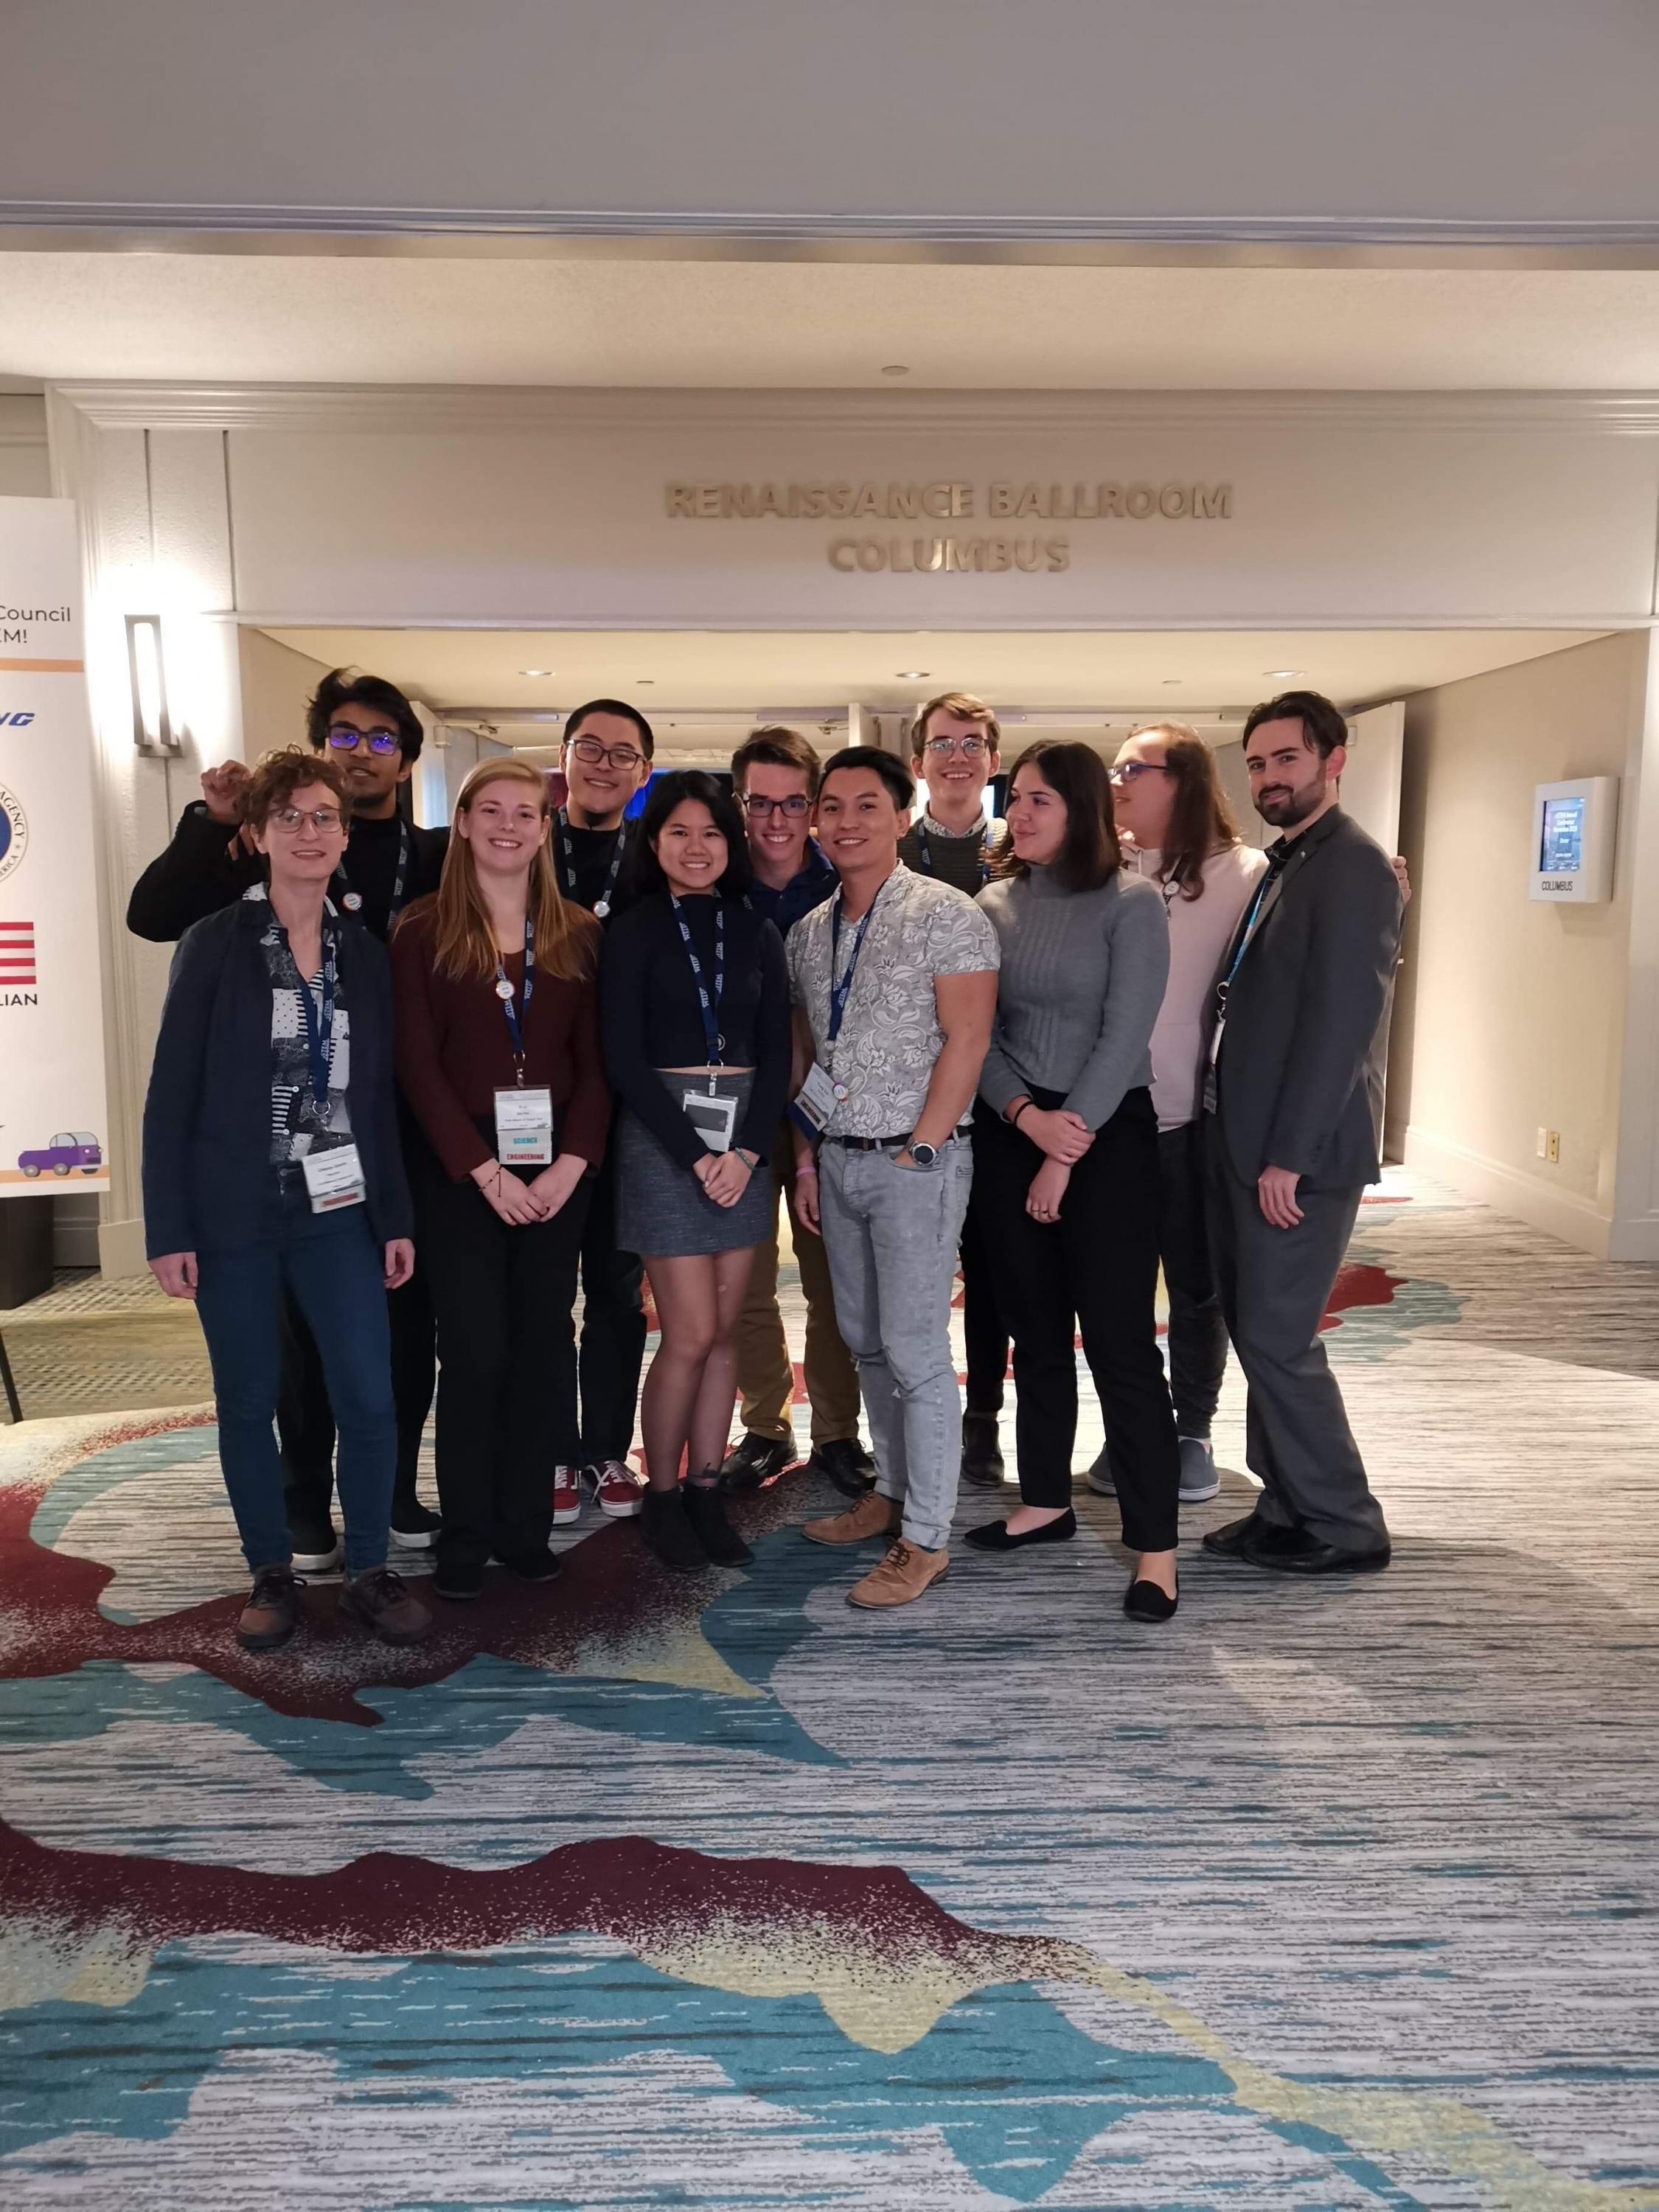 Victoria (middle, front) with friends at the 2019 oSTEM conference.